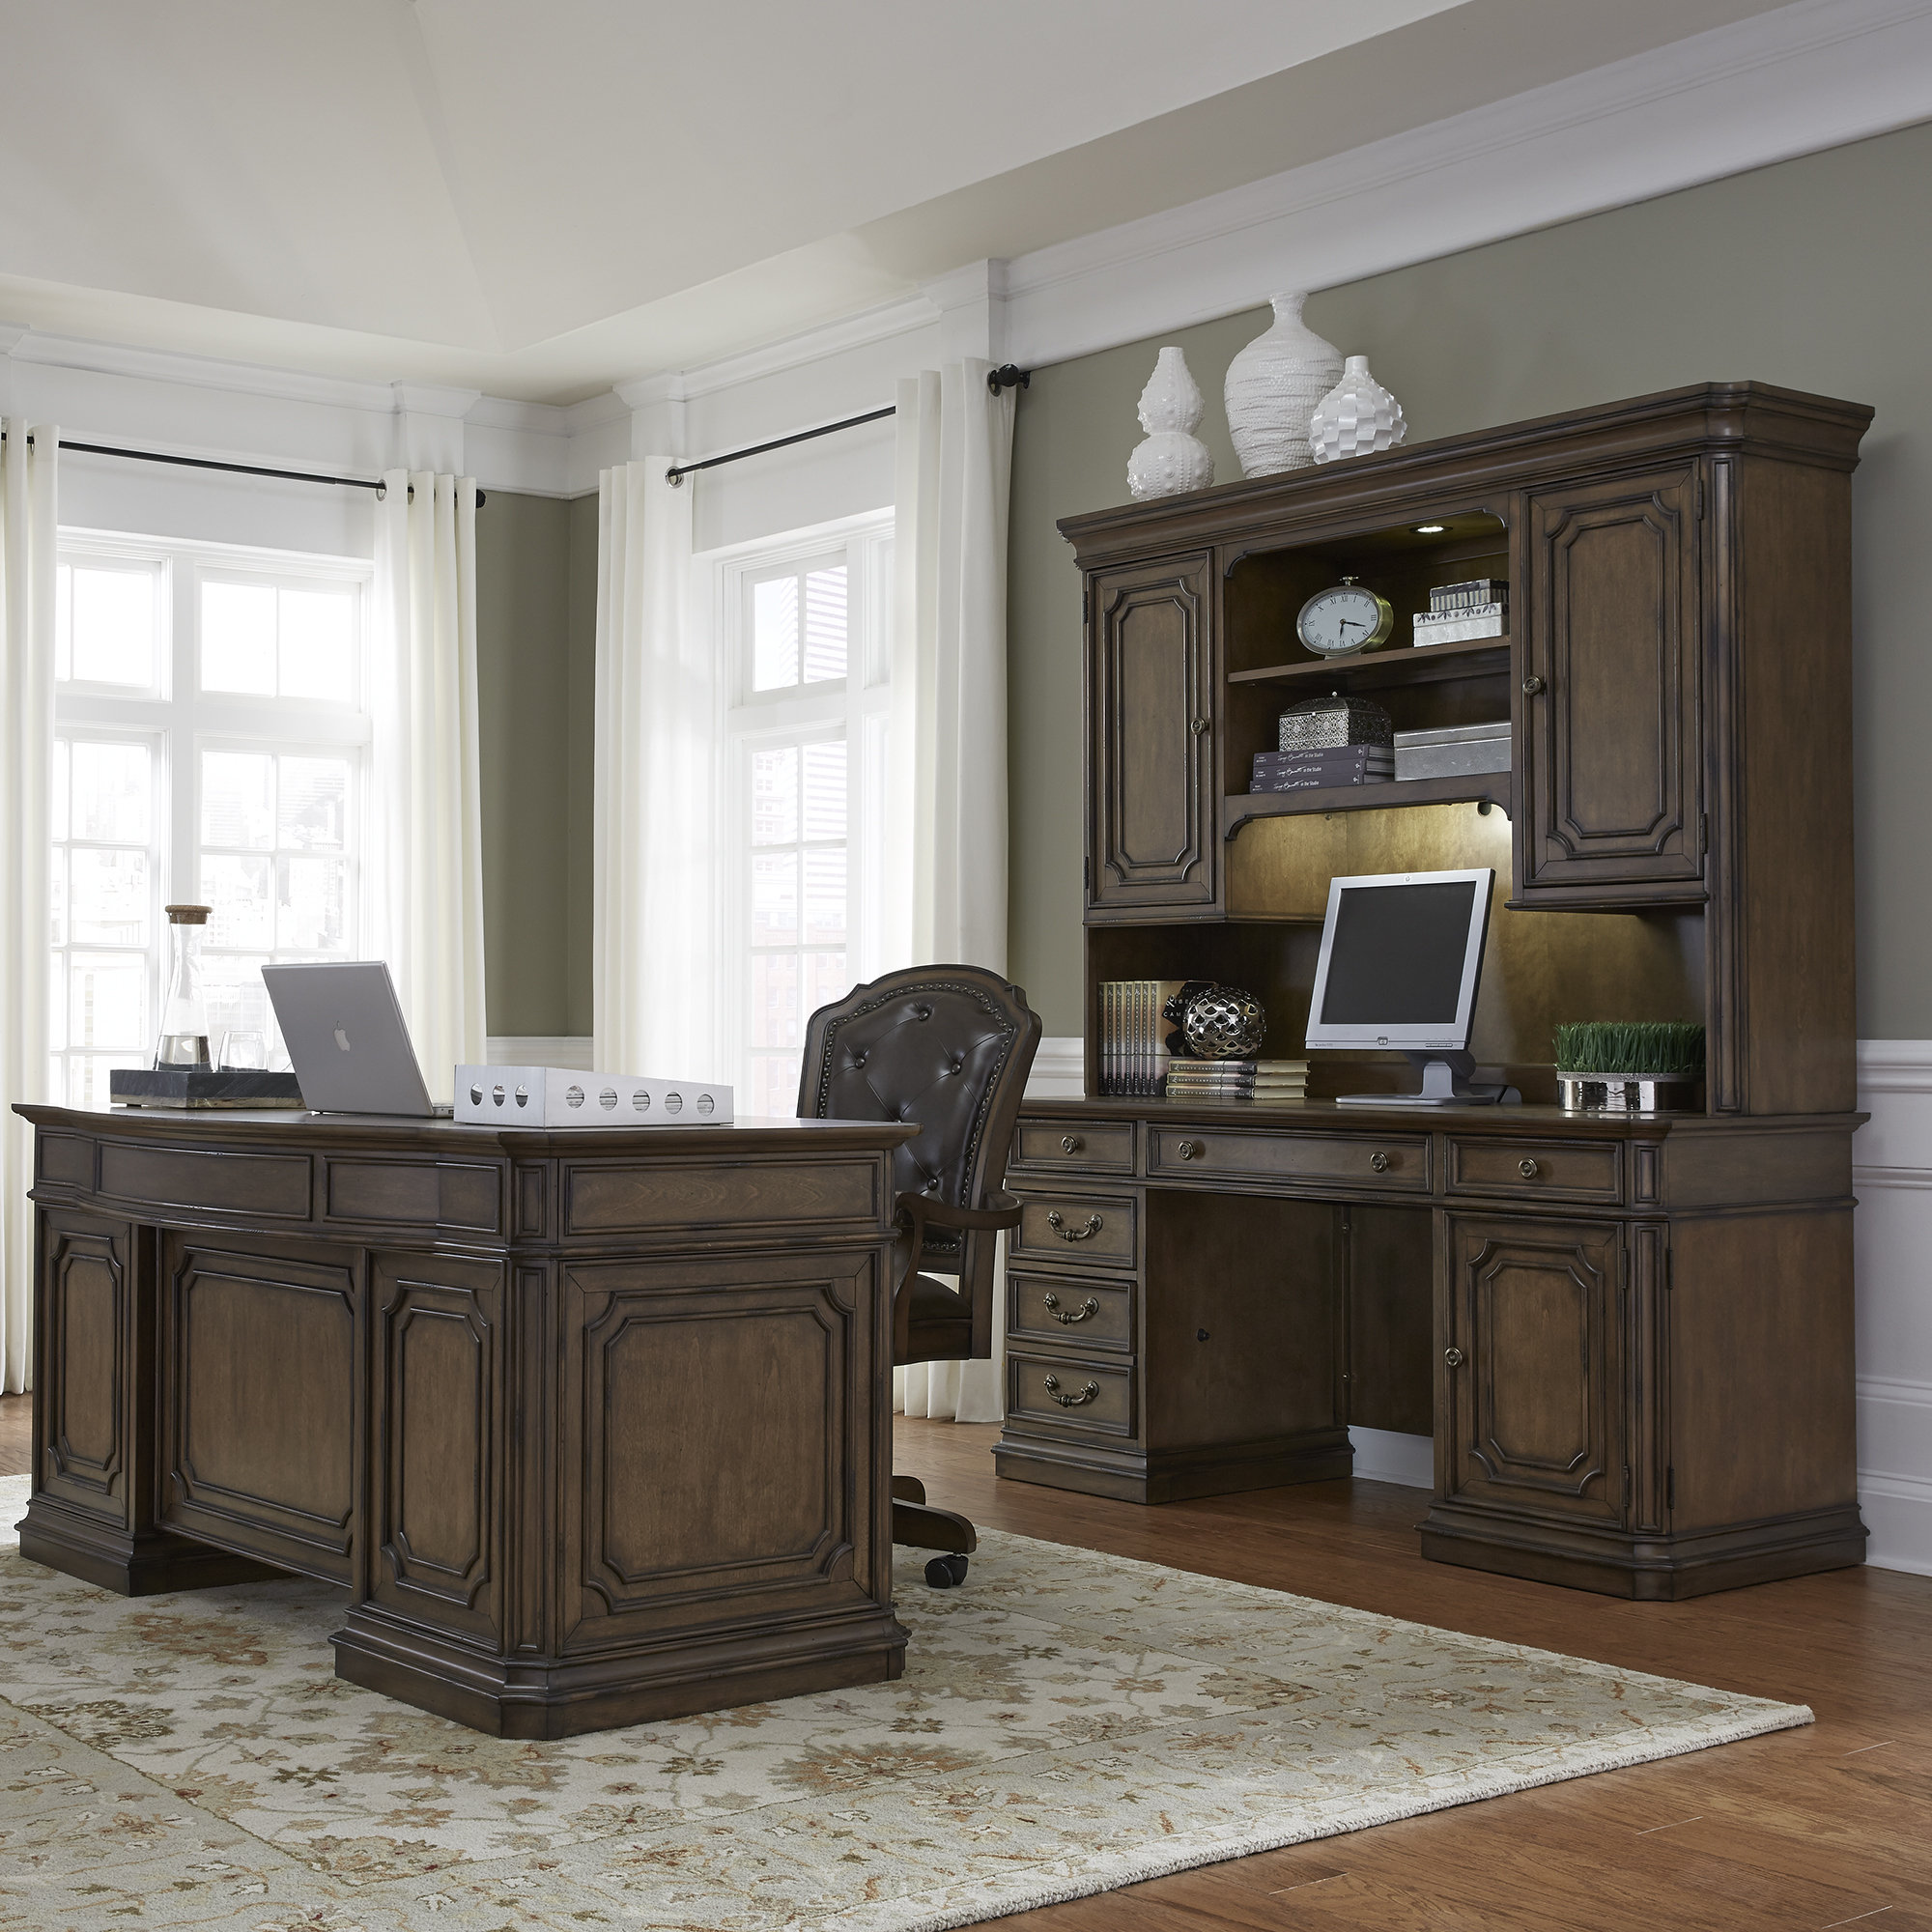 GOTRV A160 Executive Office Table - Ehao Furniture